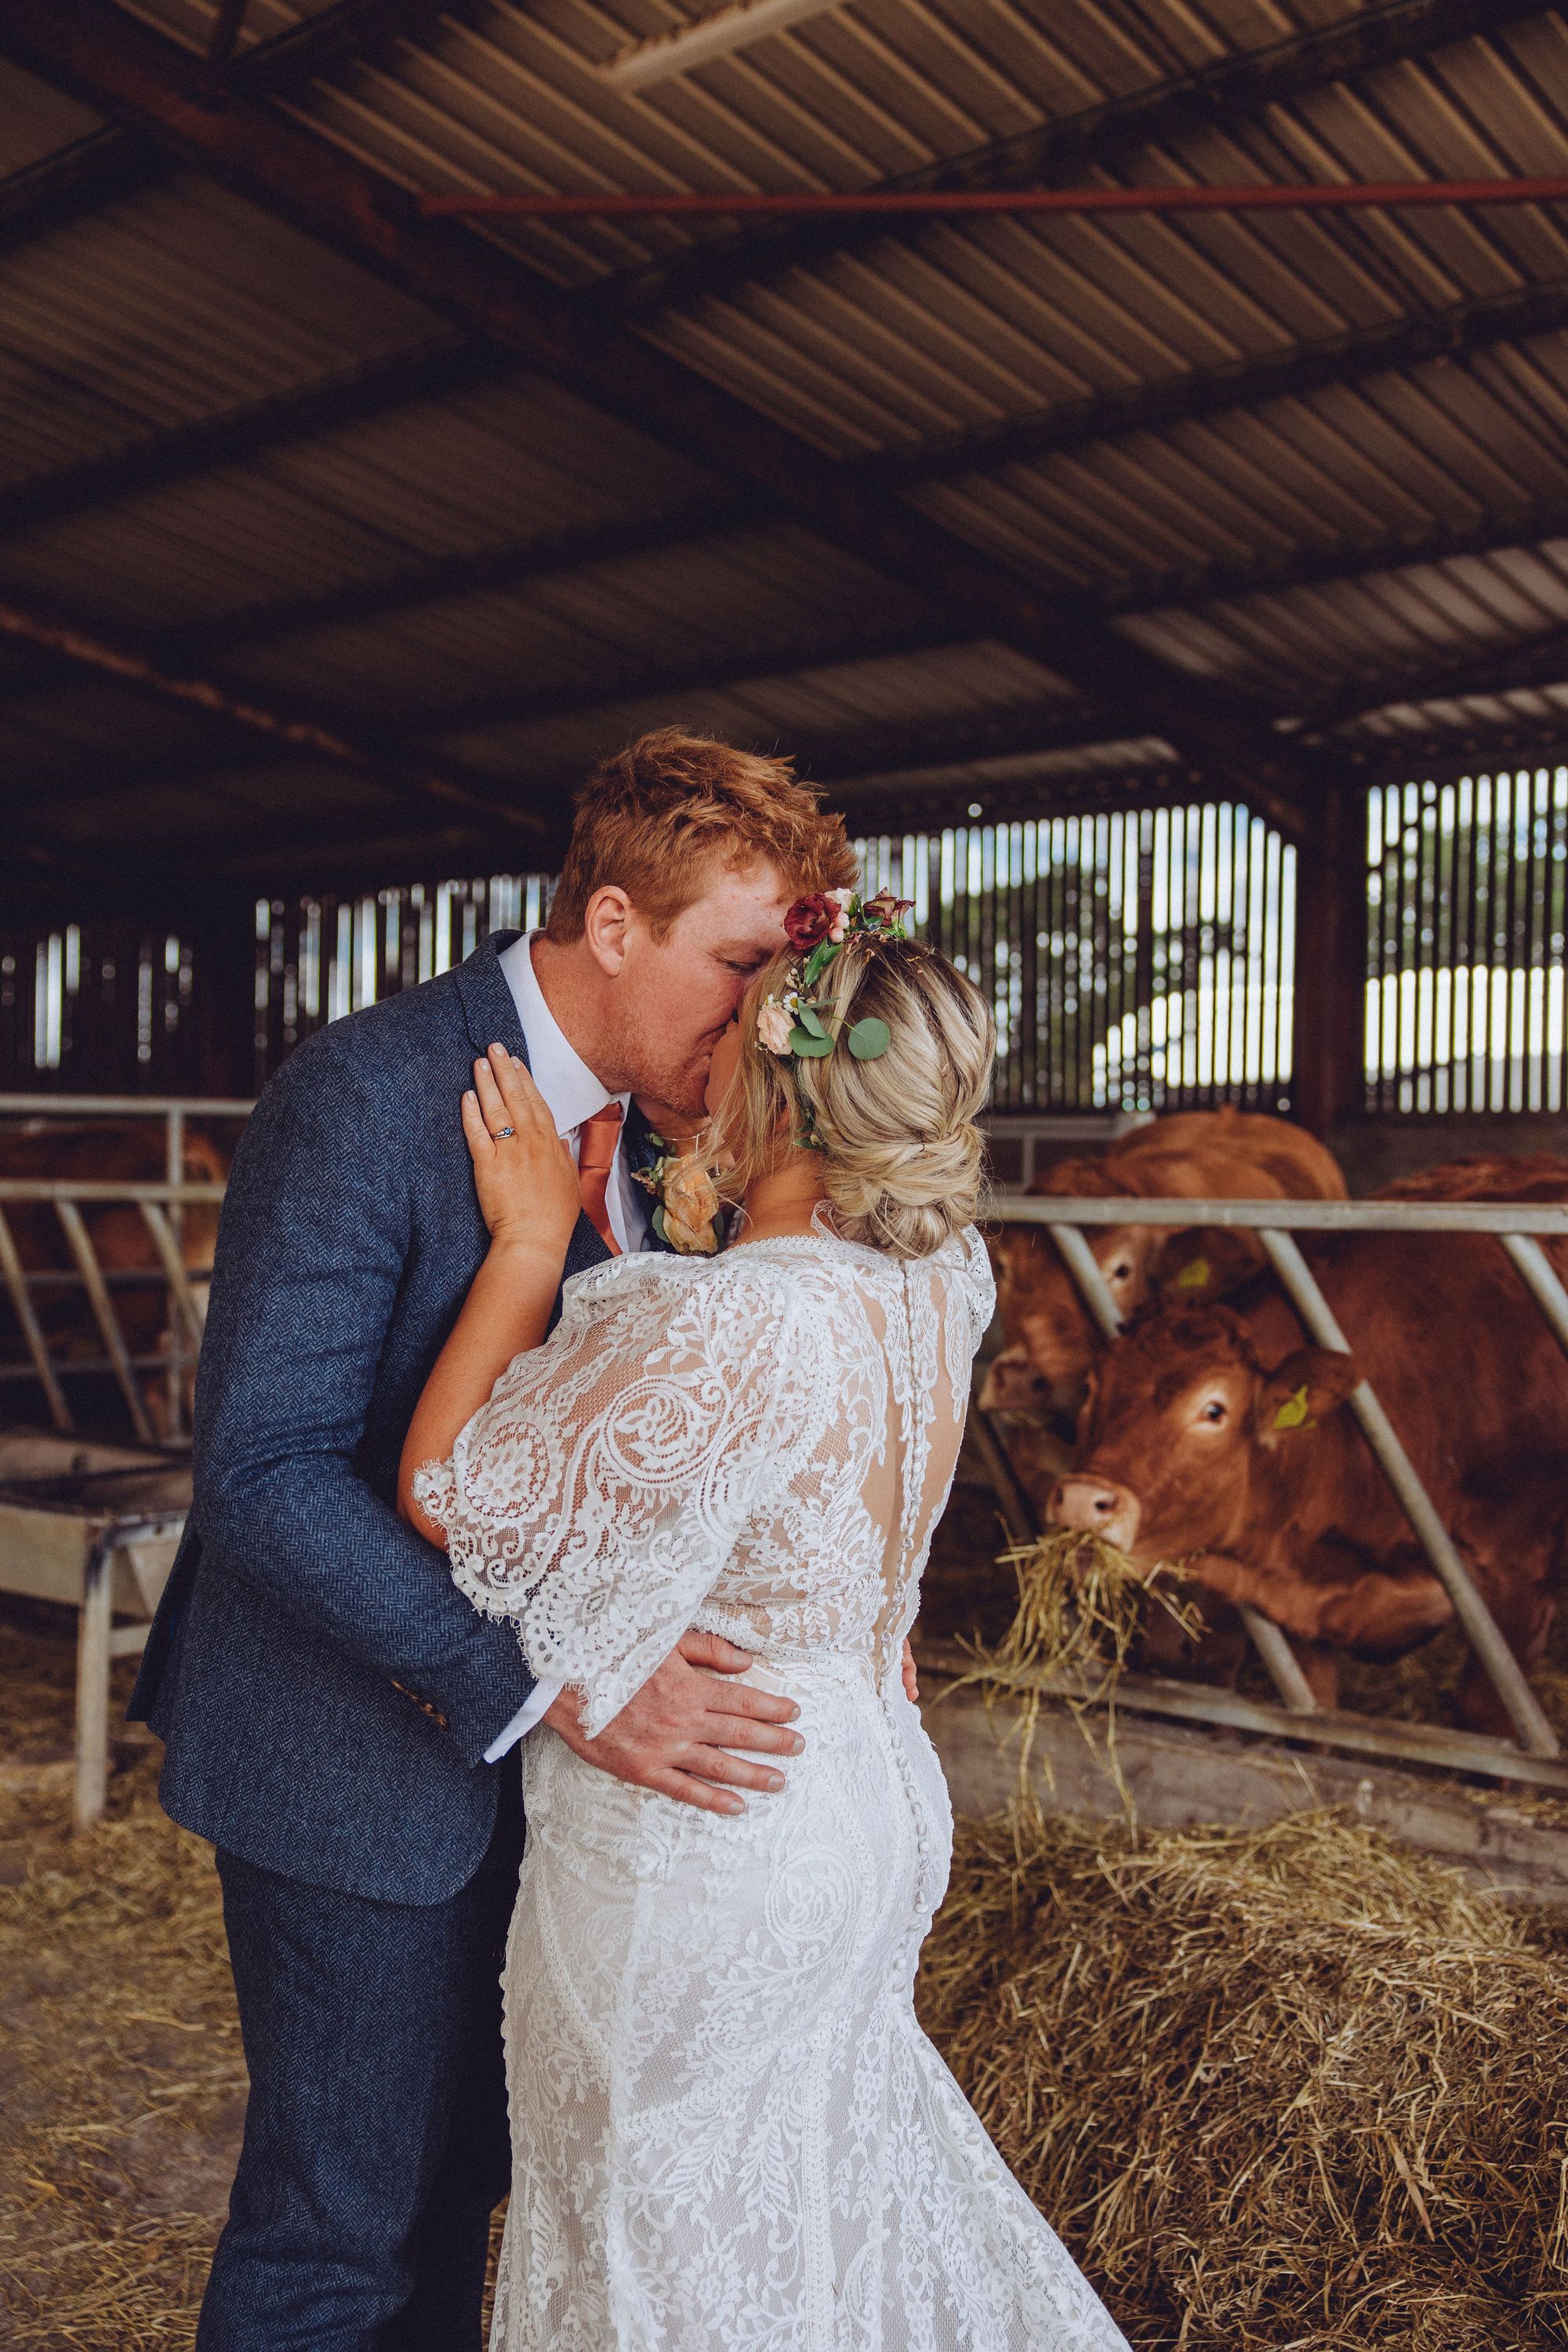 Nor and Dan steal a kiss in the barns as the cows eat hay and watch in amusement! Photo thanks to Fordtography. 